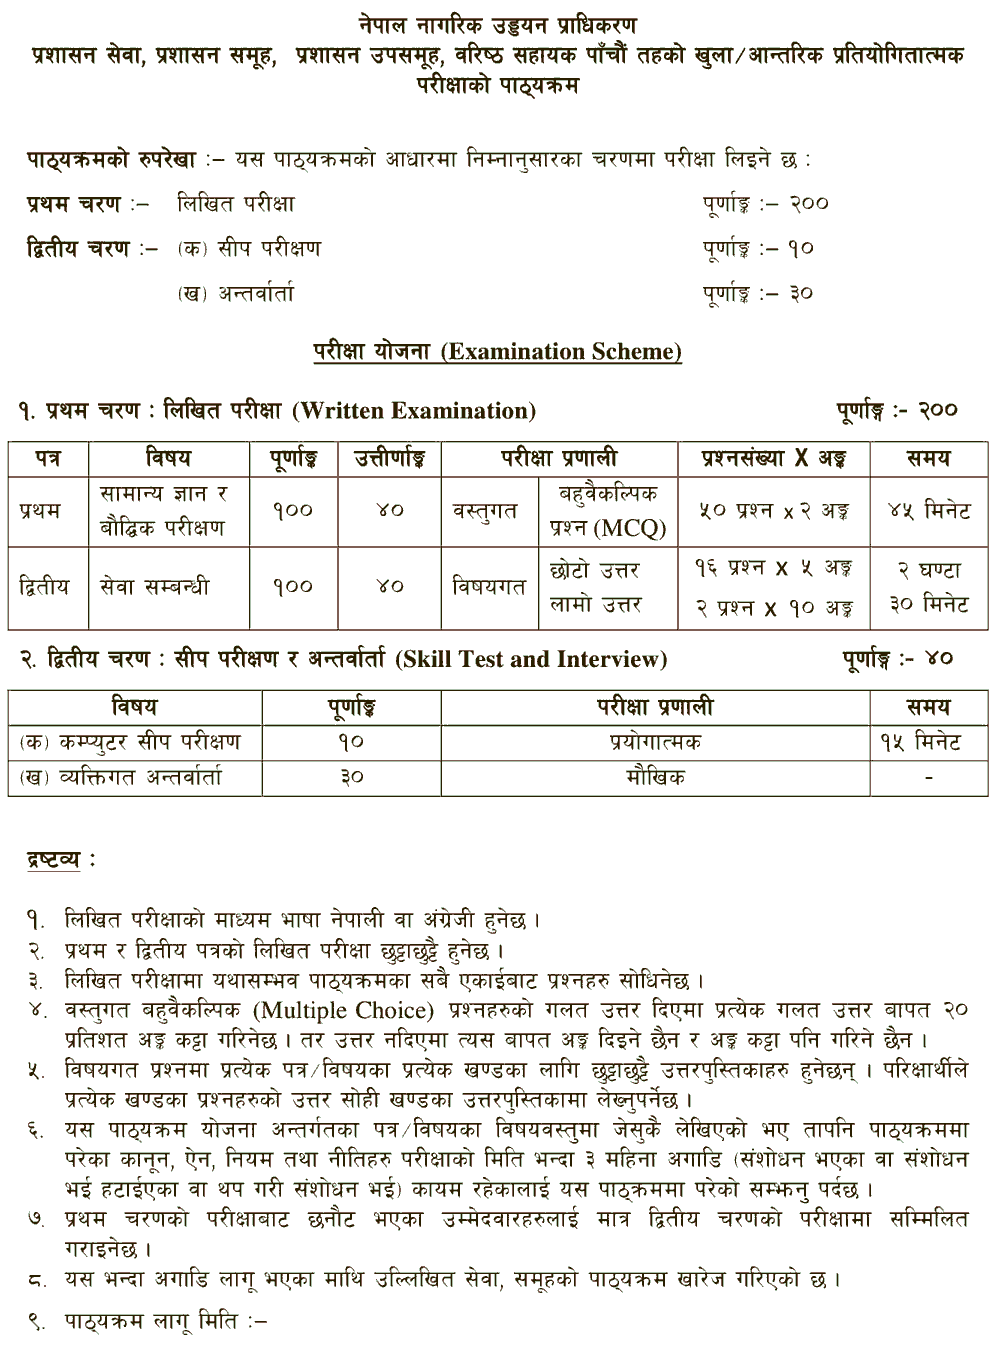 Civil Aviation Authority of Nepal 5th Level Administration Service Syllabus